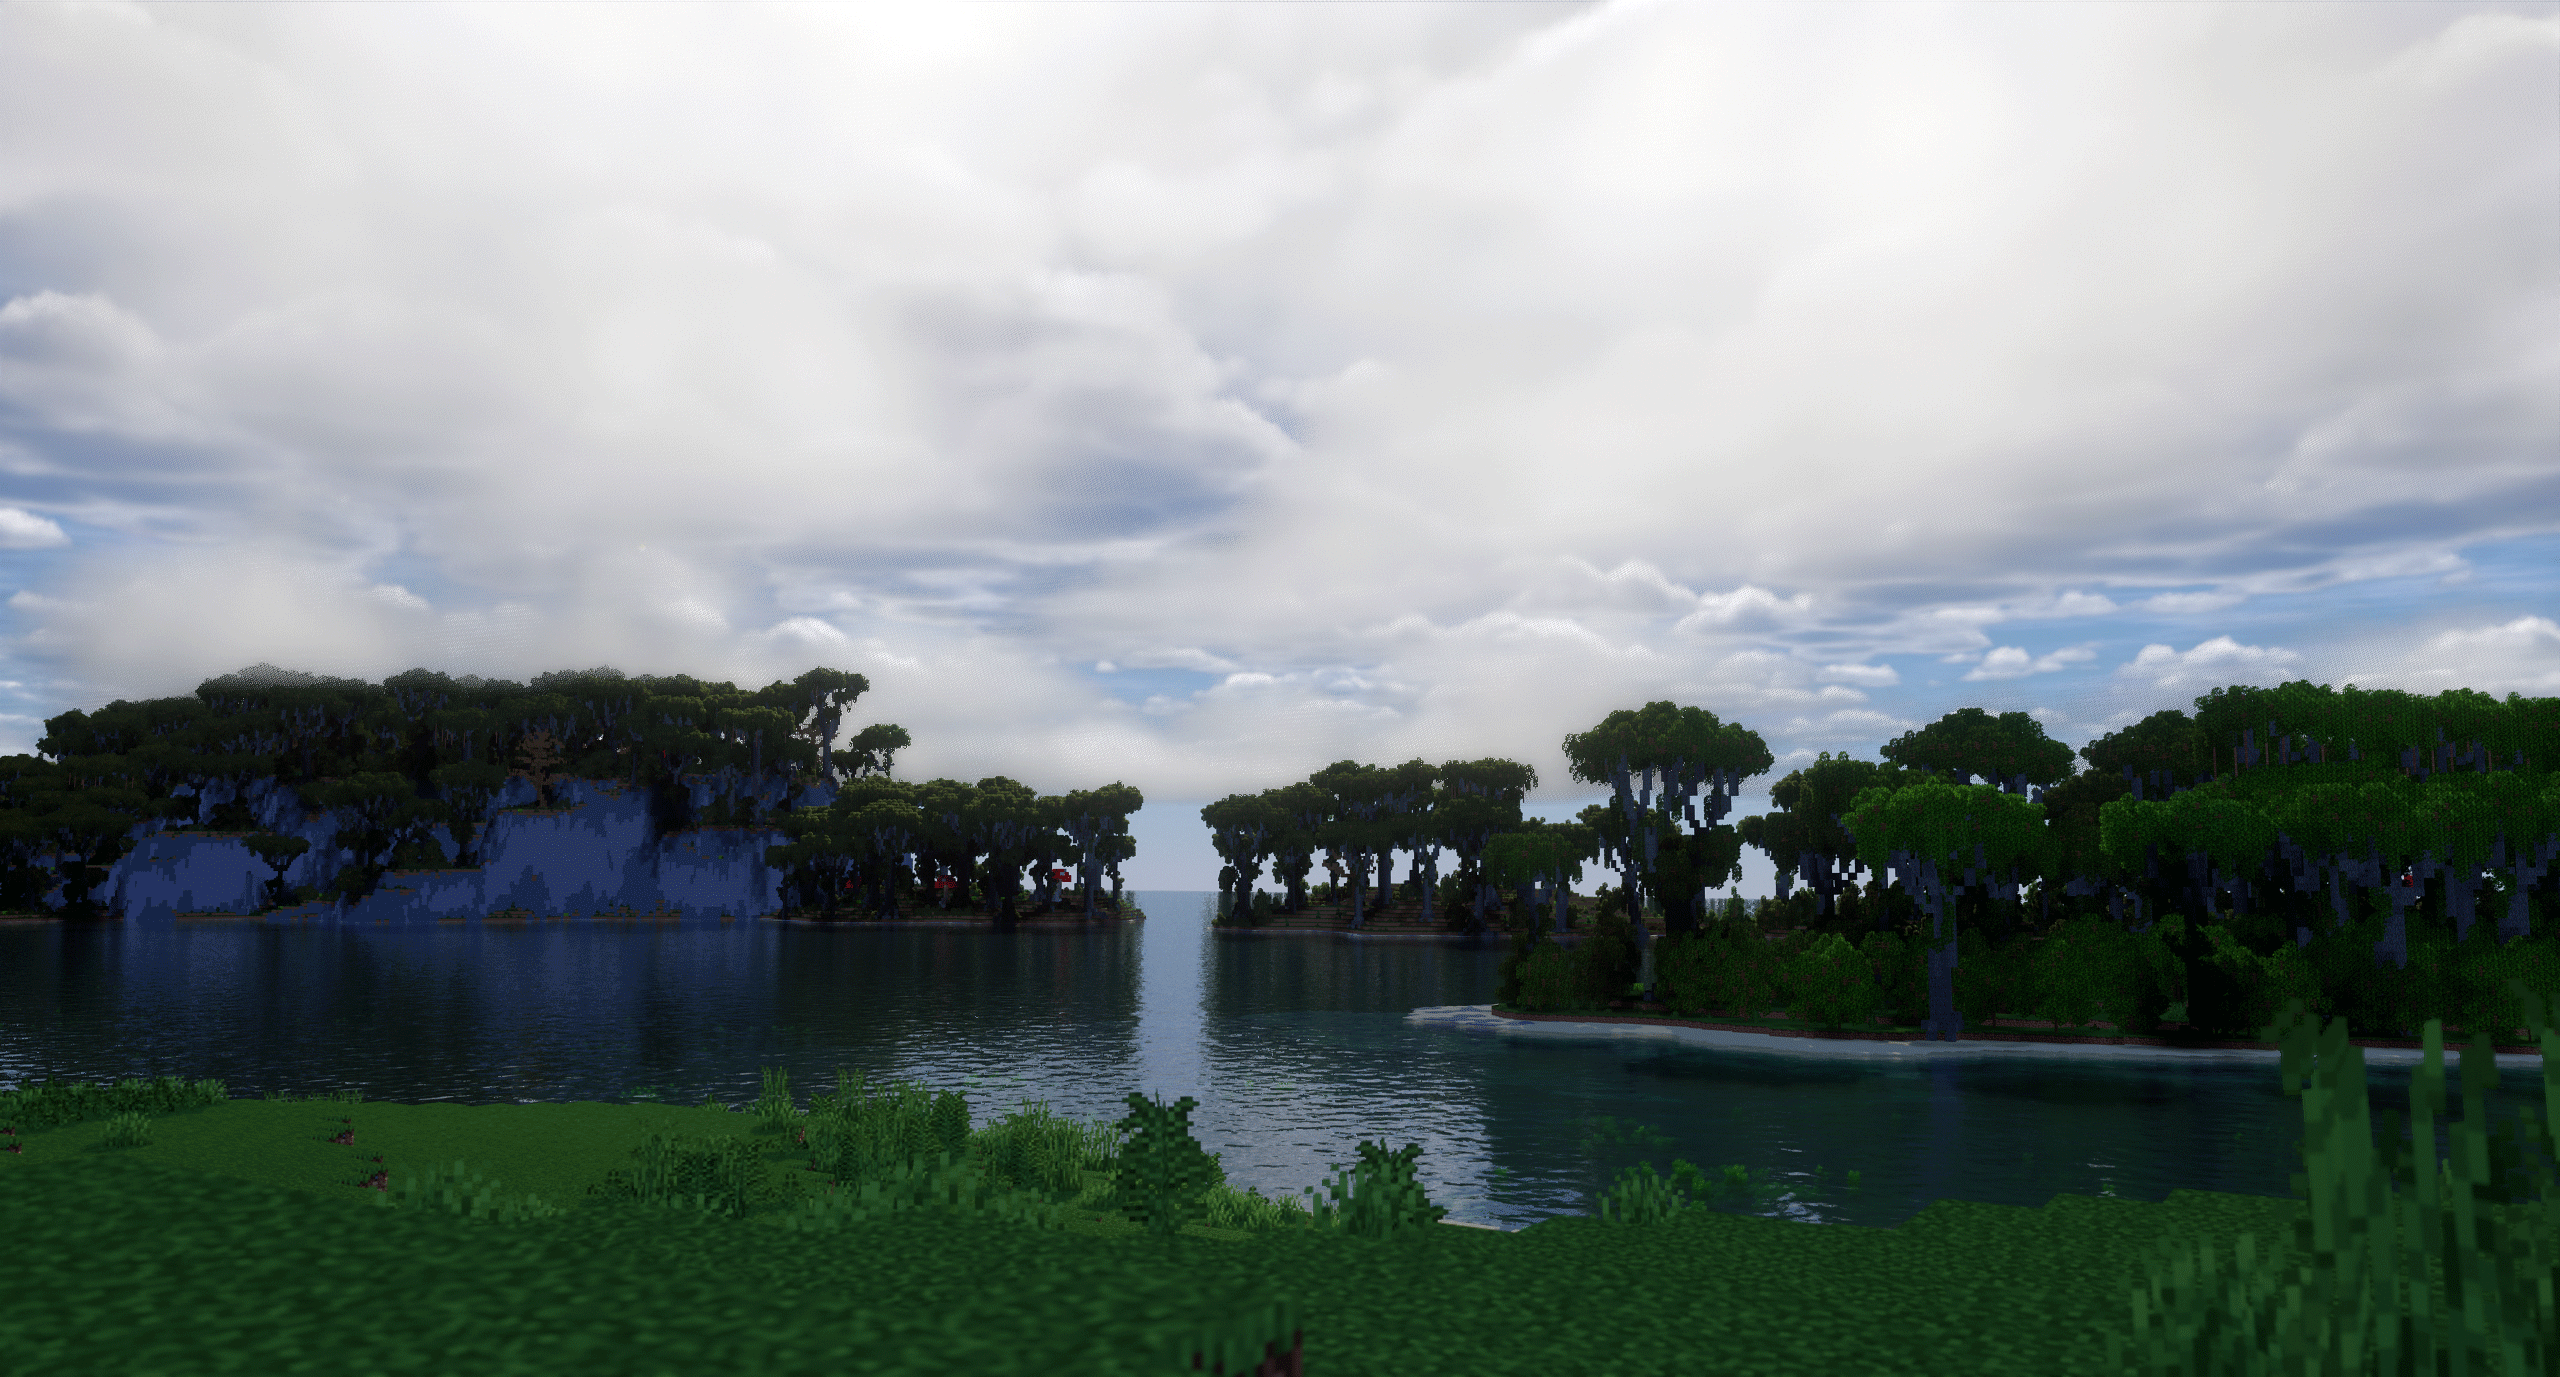 Swamp Forest